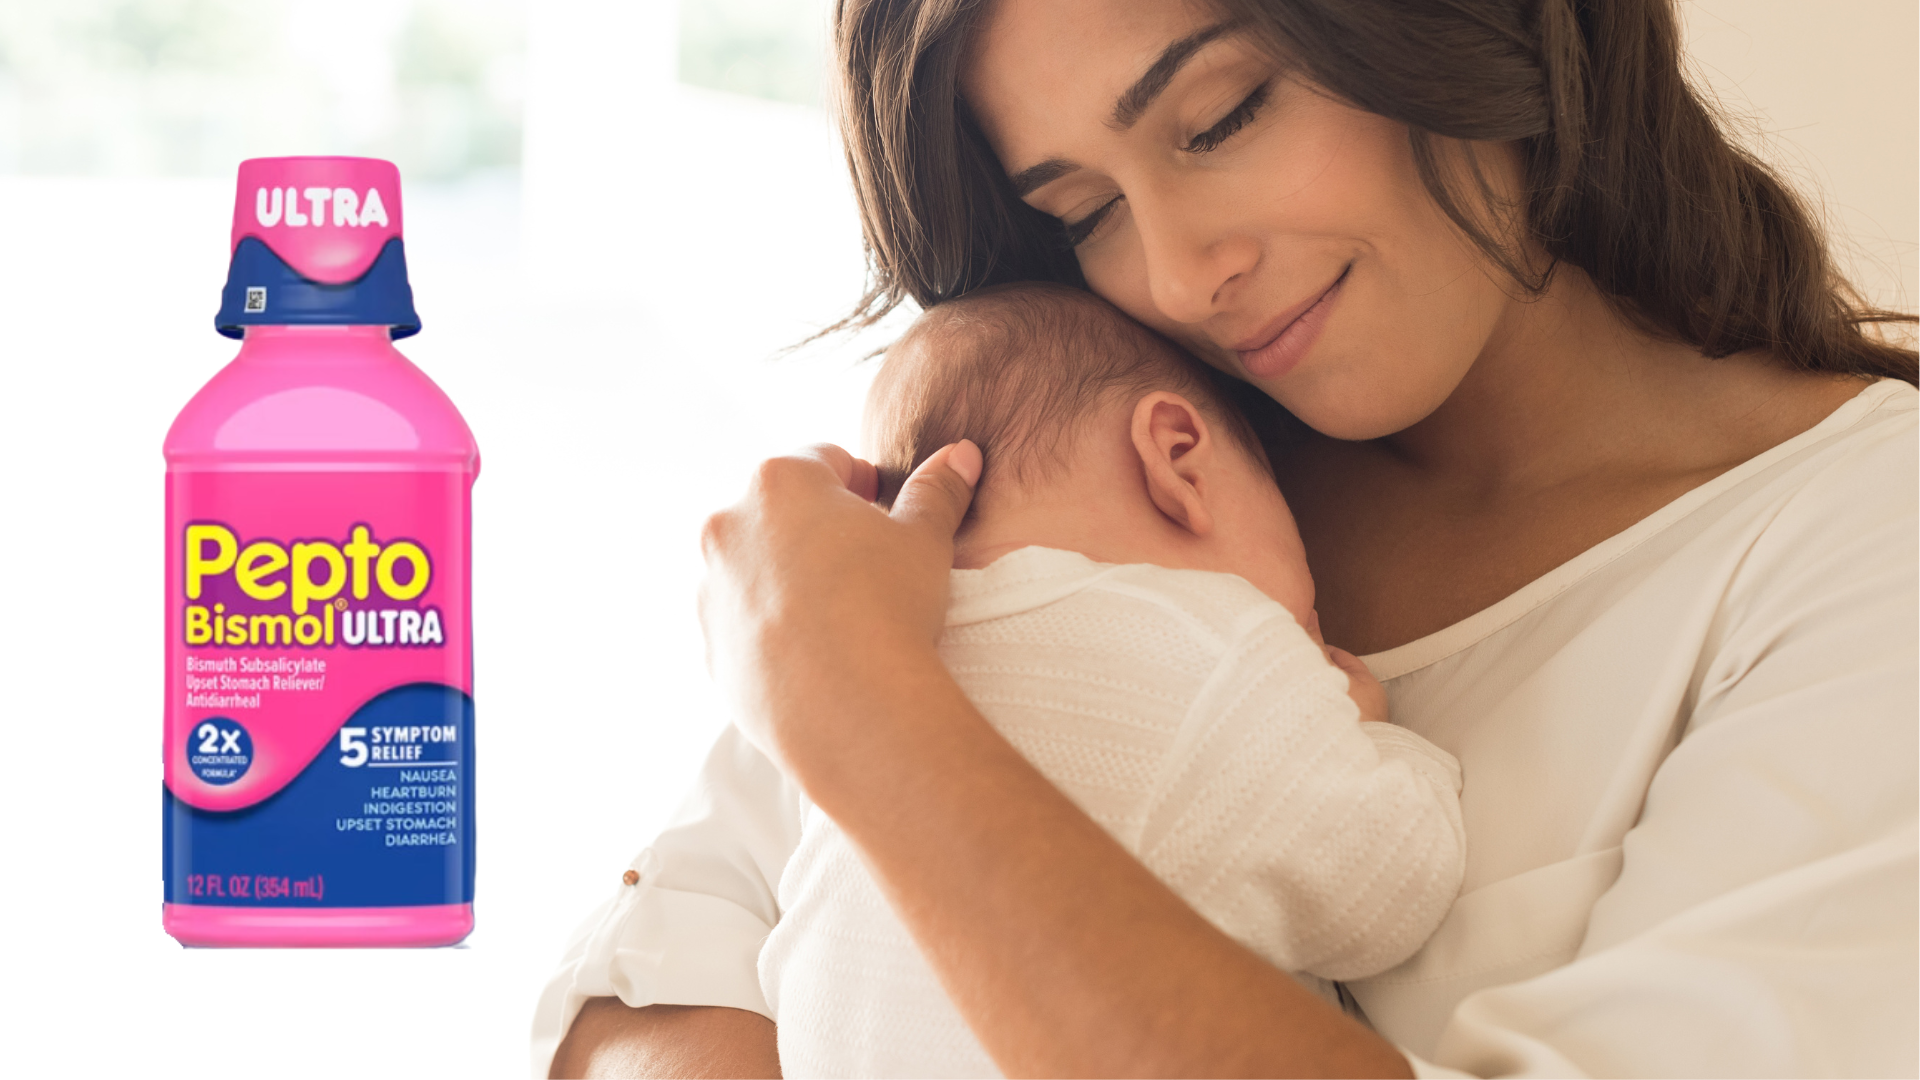 How Long After Taking Pepto Bismol Can I Breastfeed?